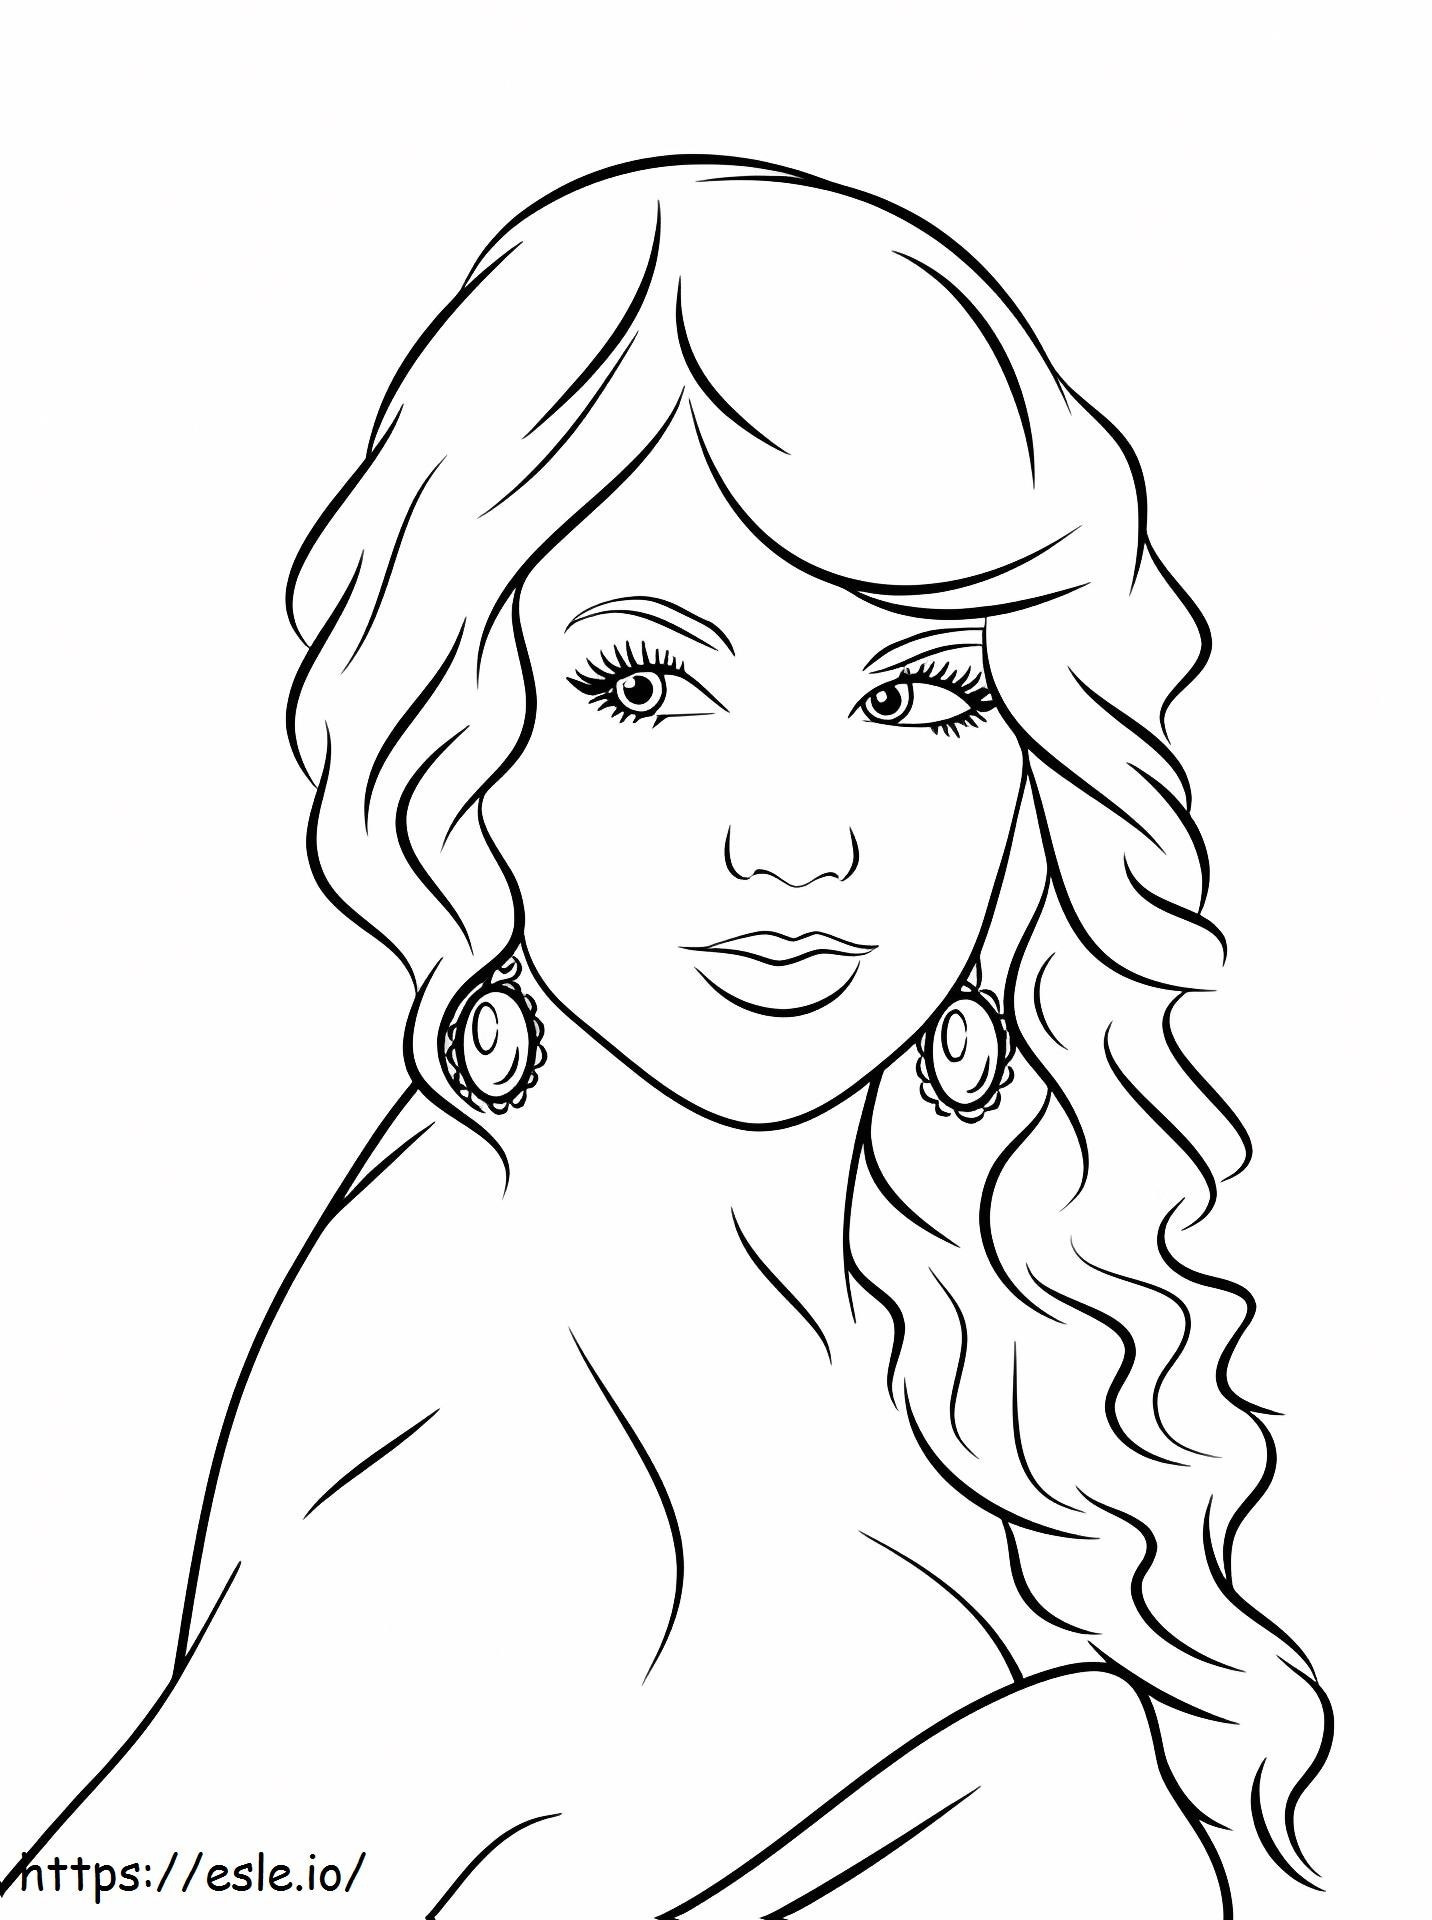 1541143564 Taylor Swift coloring page